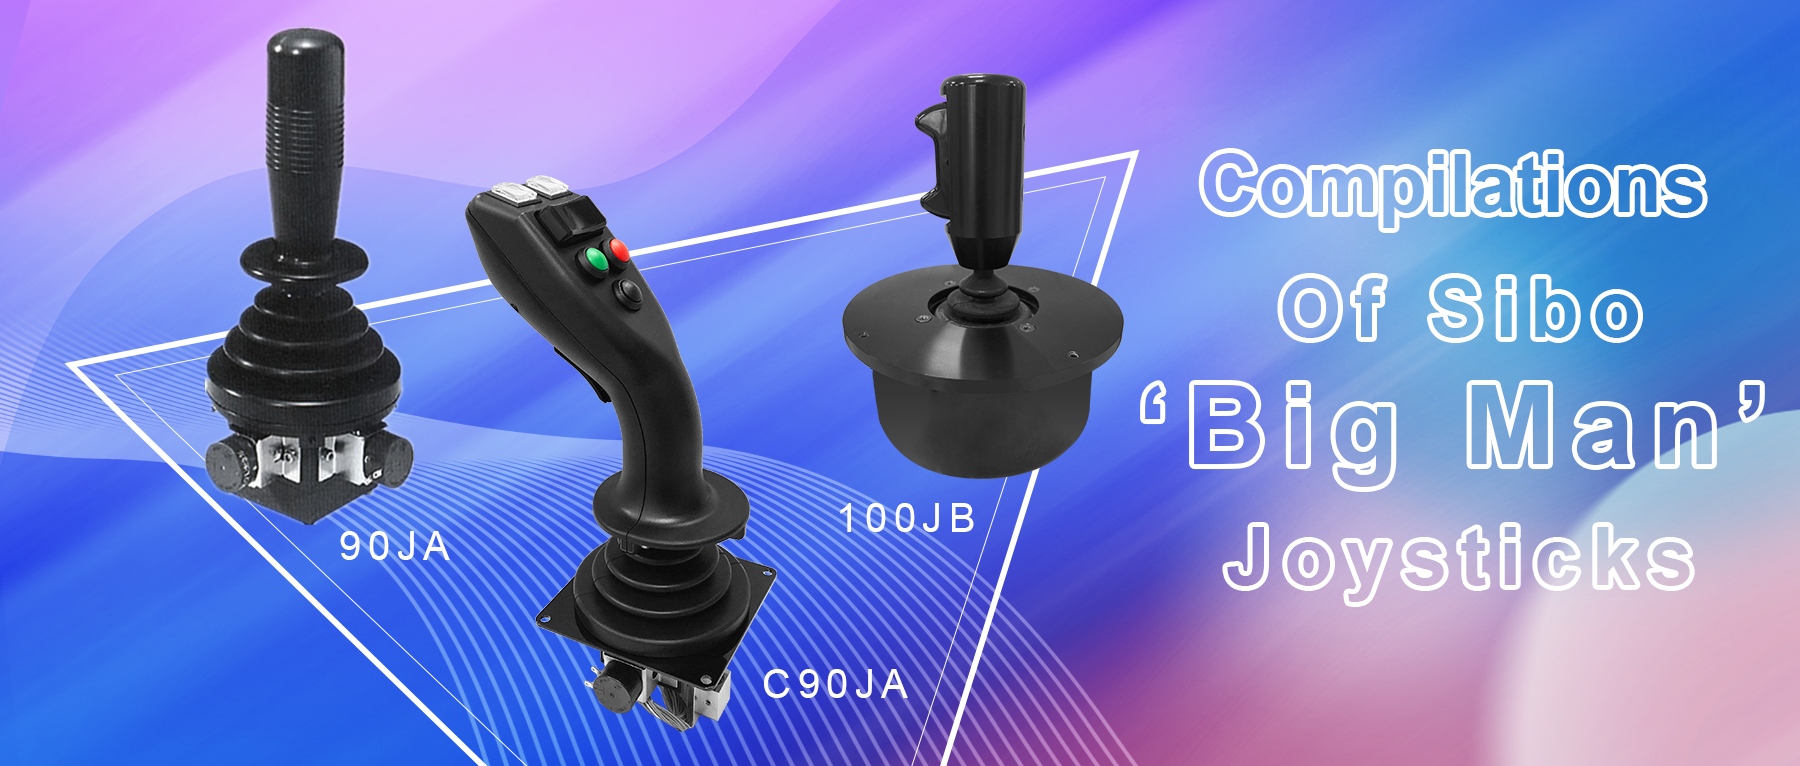 Compilations of Sibo ‘Big Man’ joysticks, the reassurance of large and medium-sized machinery control!